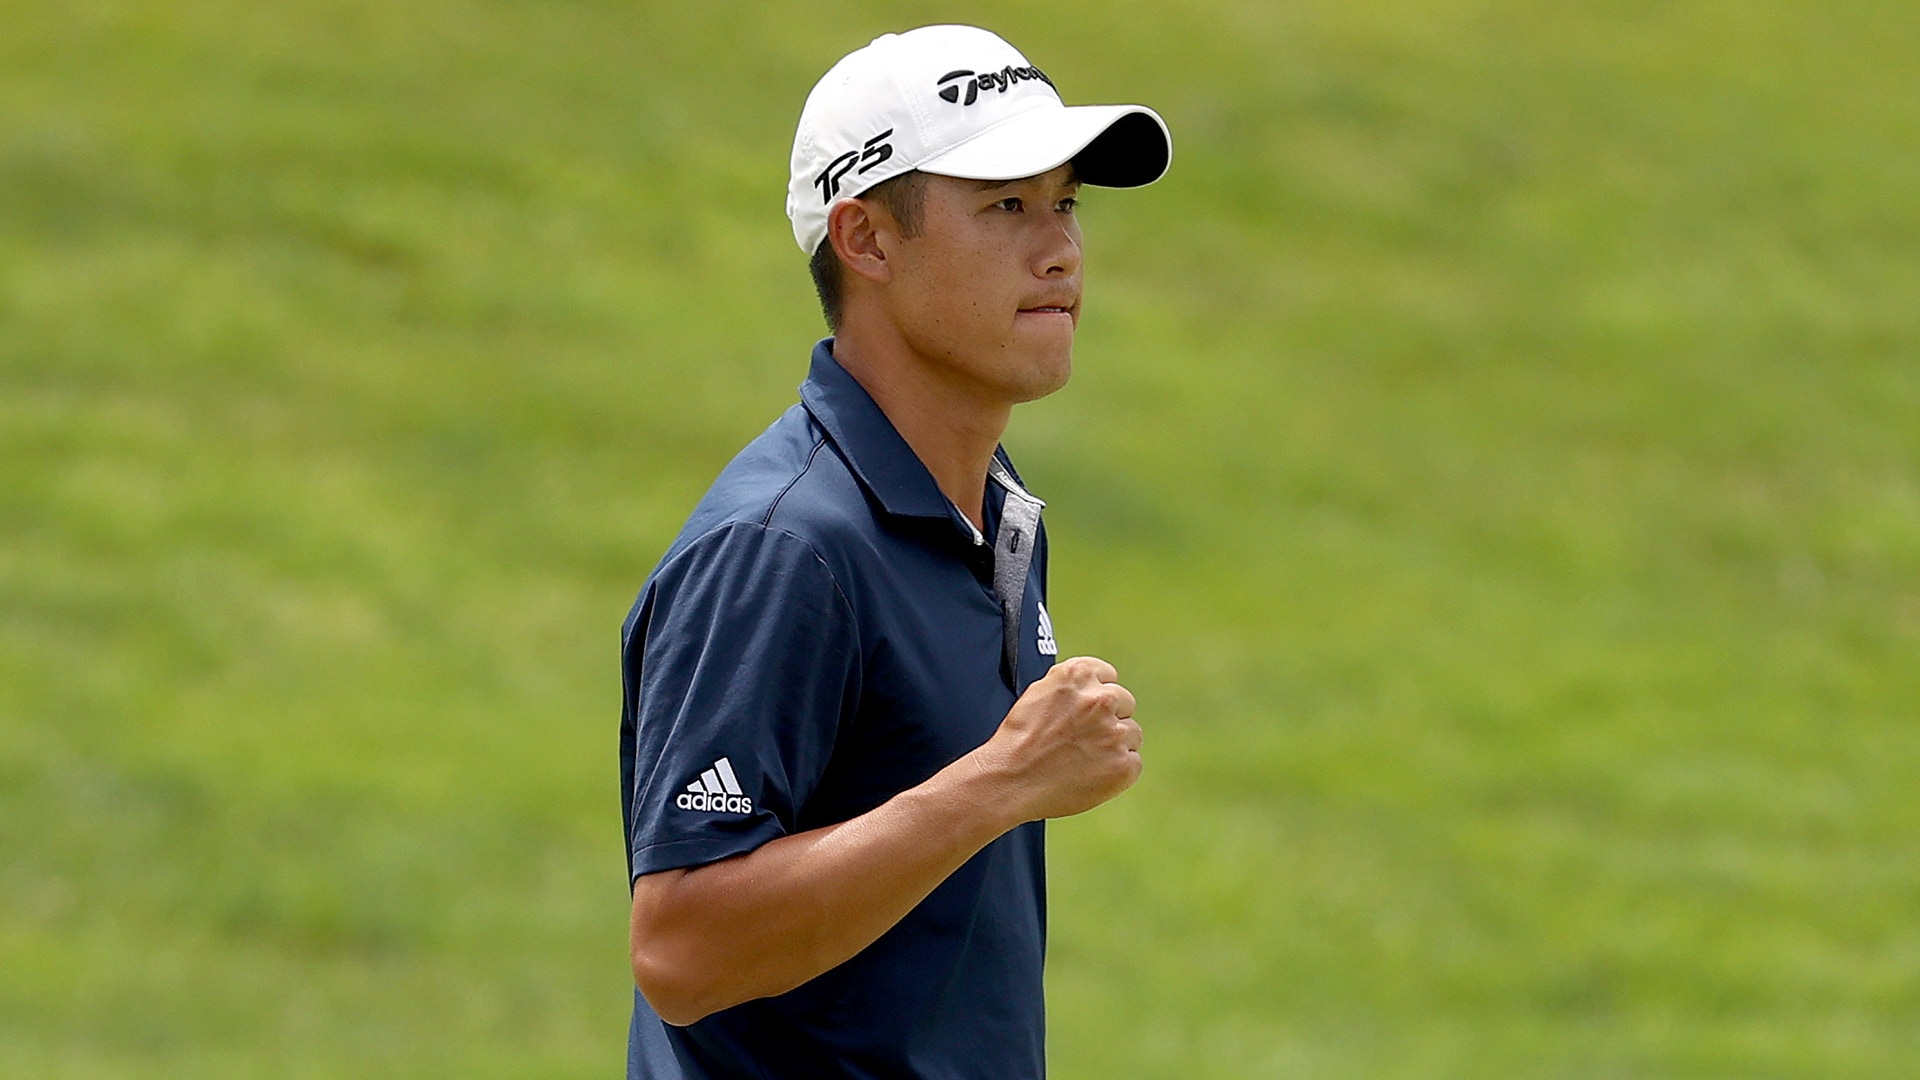 Collin Morikawa outlasts Justin Thomas in playoff to win wild Workday